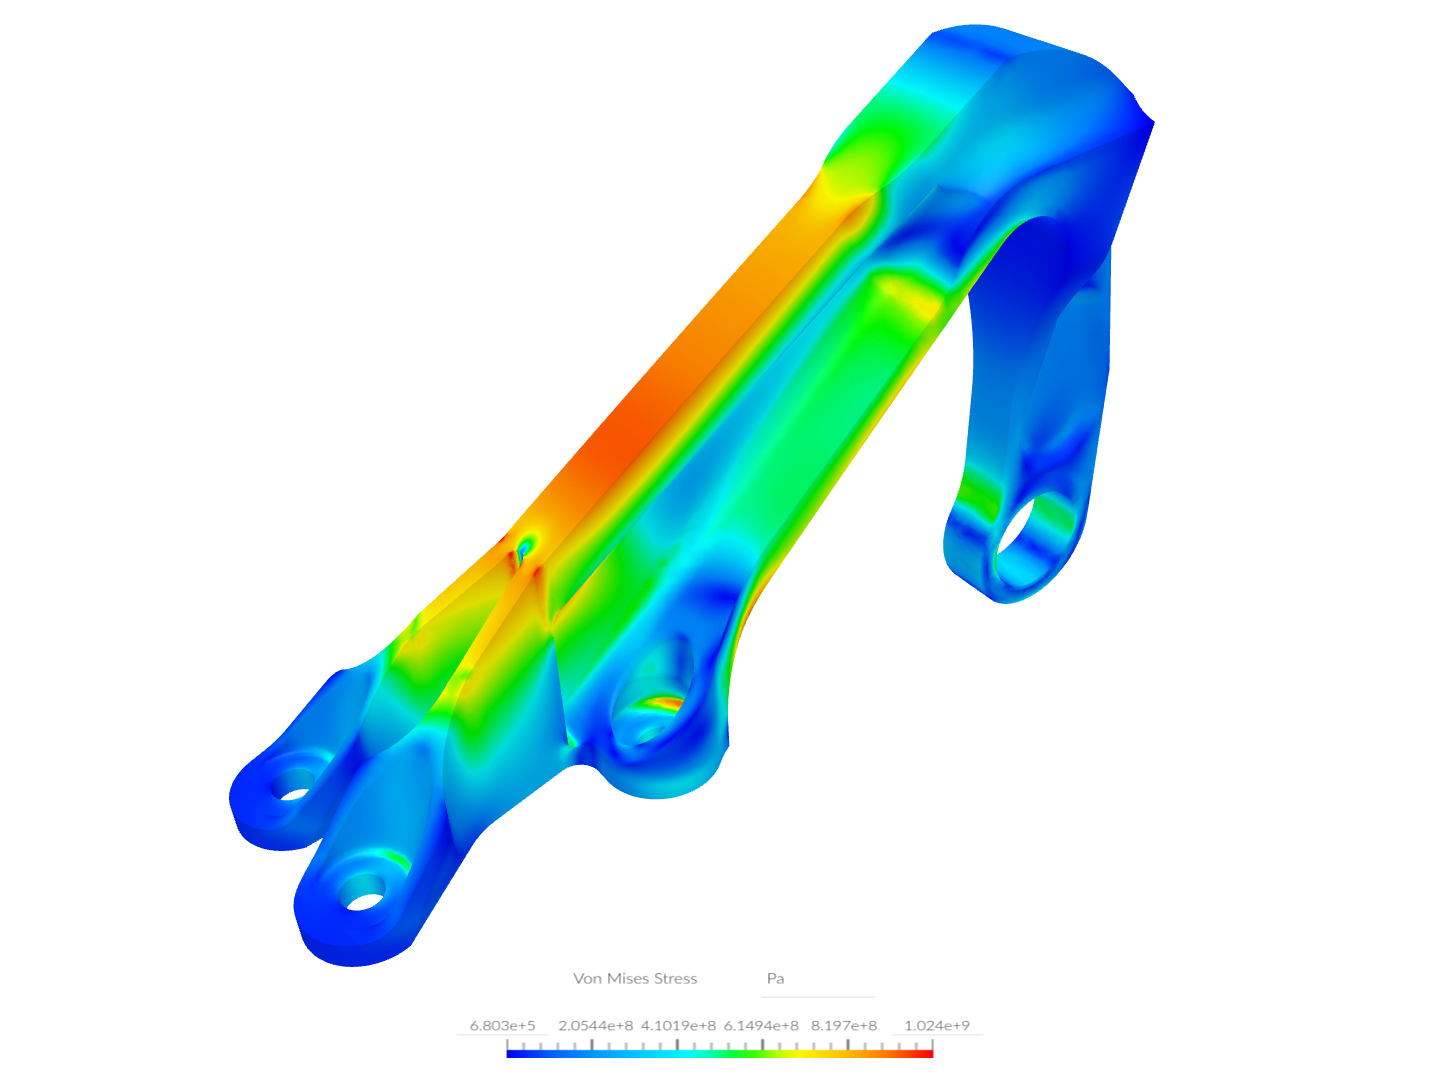 Coursera: FEM Linear, Nonlinear Analysis and Post-Processing Project: Bearing Bracket Analysis by Jousefm - Copy image